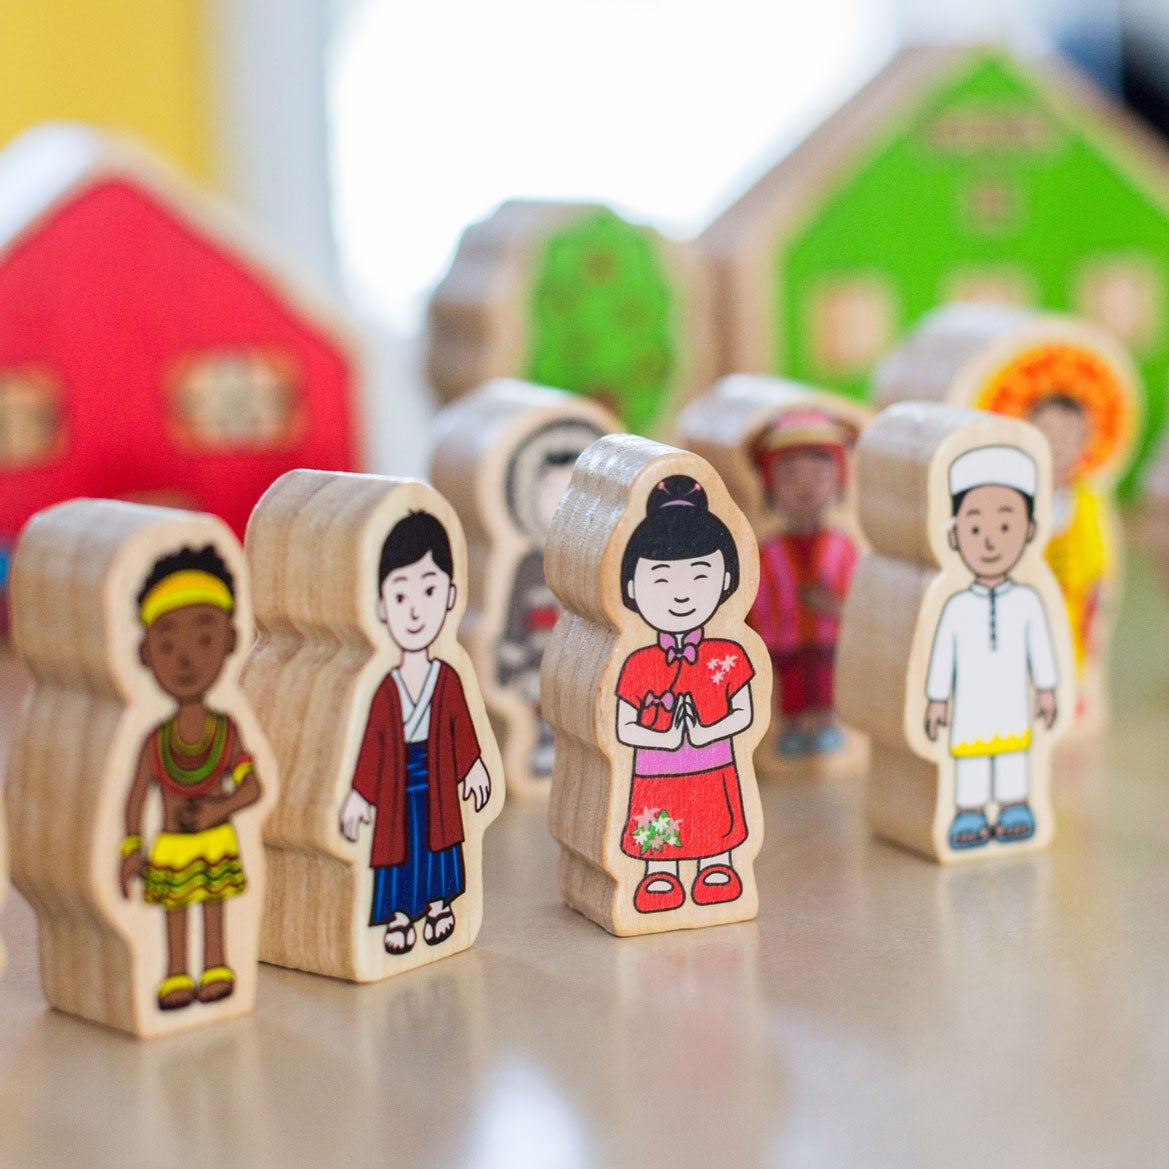 Children of the World, Introducing the Freckled Frog Children of the World, an inclusive and educational wooden people set that celebrates the diversity of cultures from all around the globe.This set consists of 18 brightly colored wooden figures, each representing a different culture from various parts of the world. From African to Scottish, Indian to Russian, children can explore and learn about different cultures as they engage in role-playing, storytelling, and creative play.These high-quality wooden pe